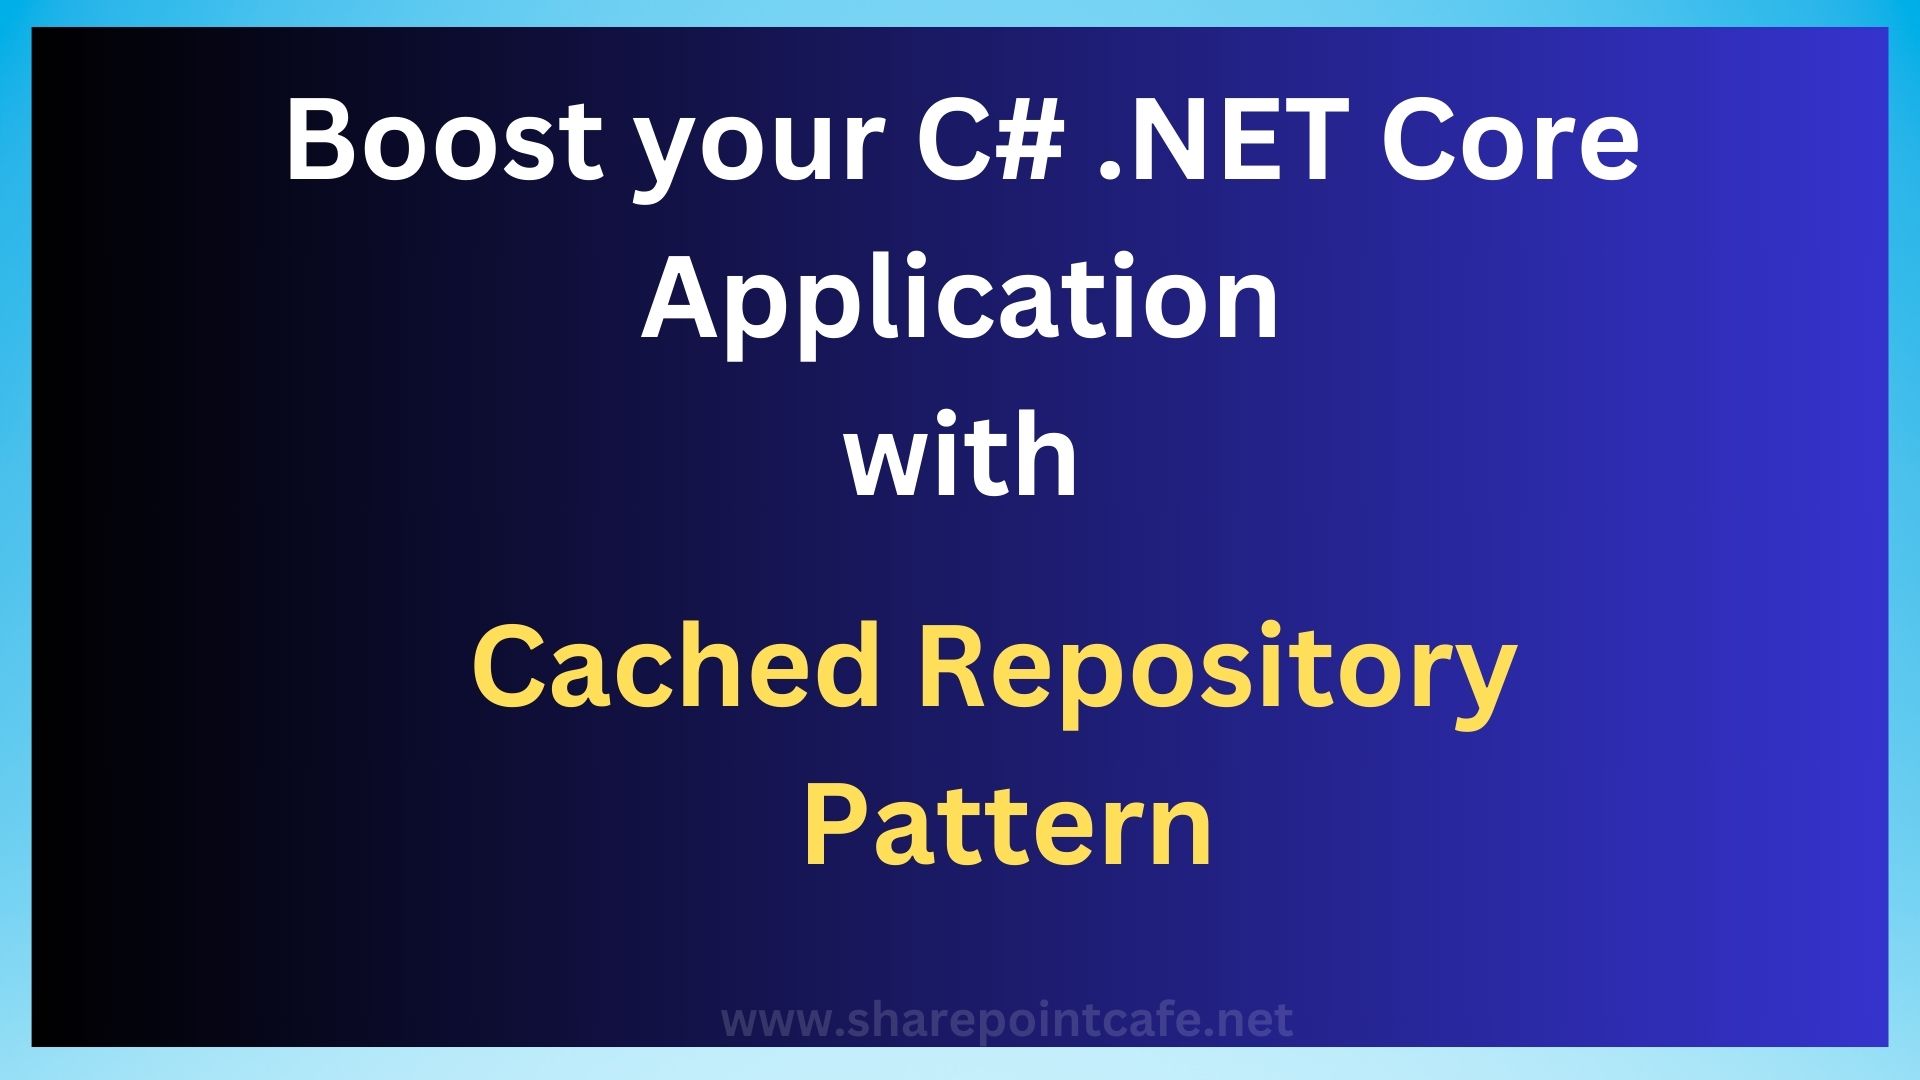 Cached Repository Pattern